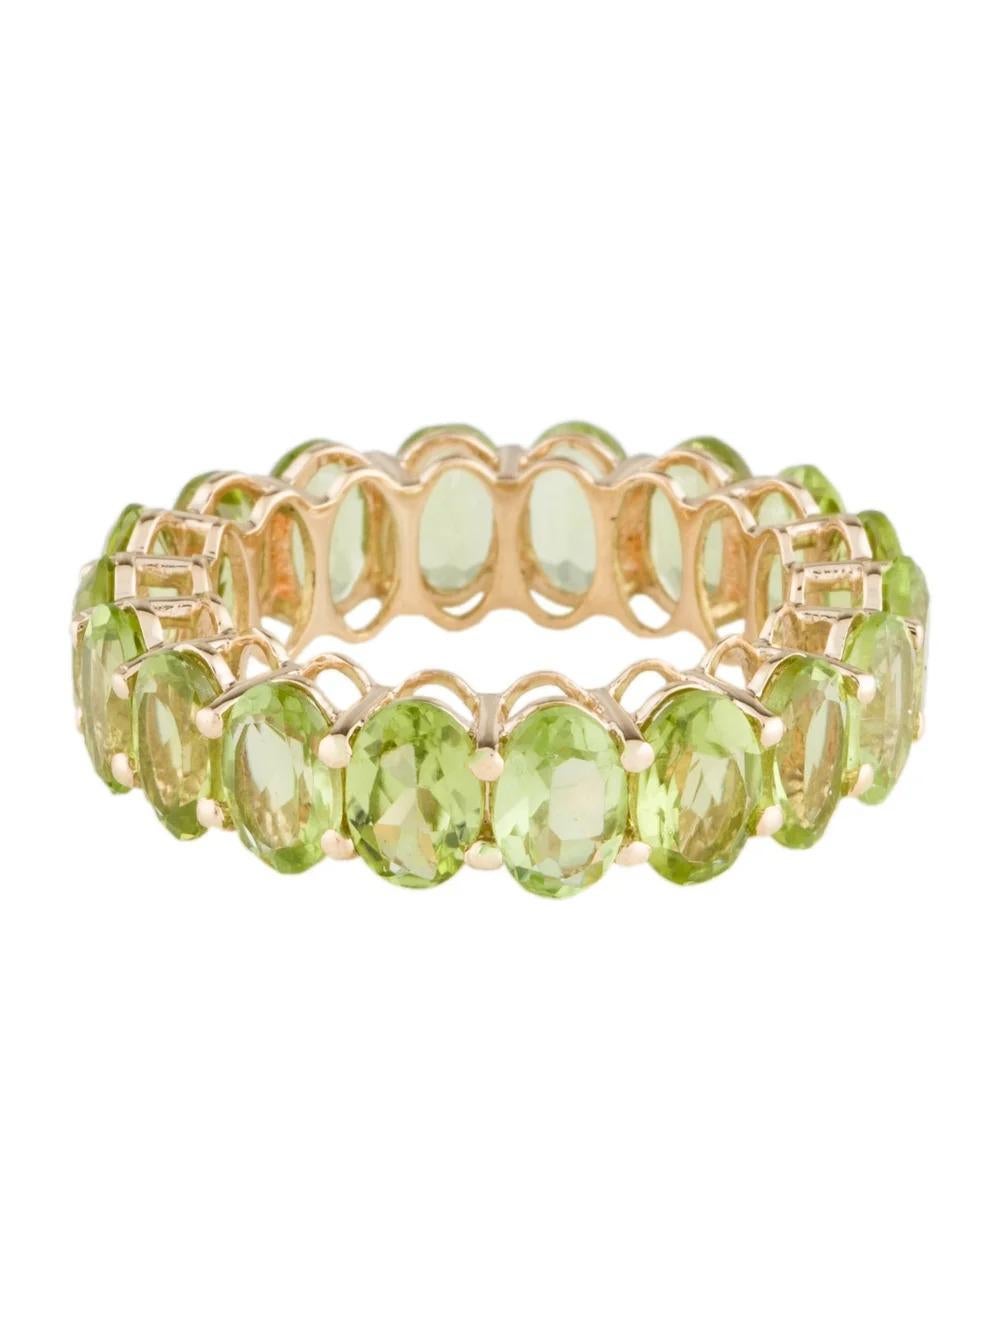 Oval Cut 14K Peridot Eternity Band Ring - Size 7, Timeless Style, Vibrant Green Gemstones For Sale